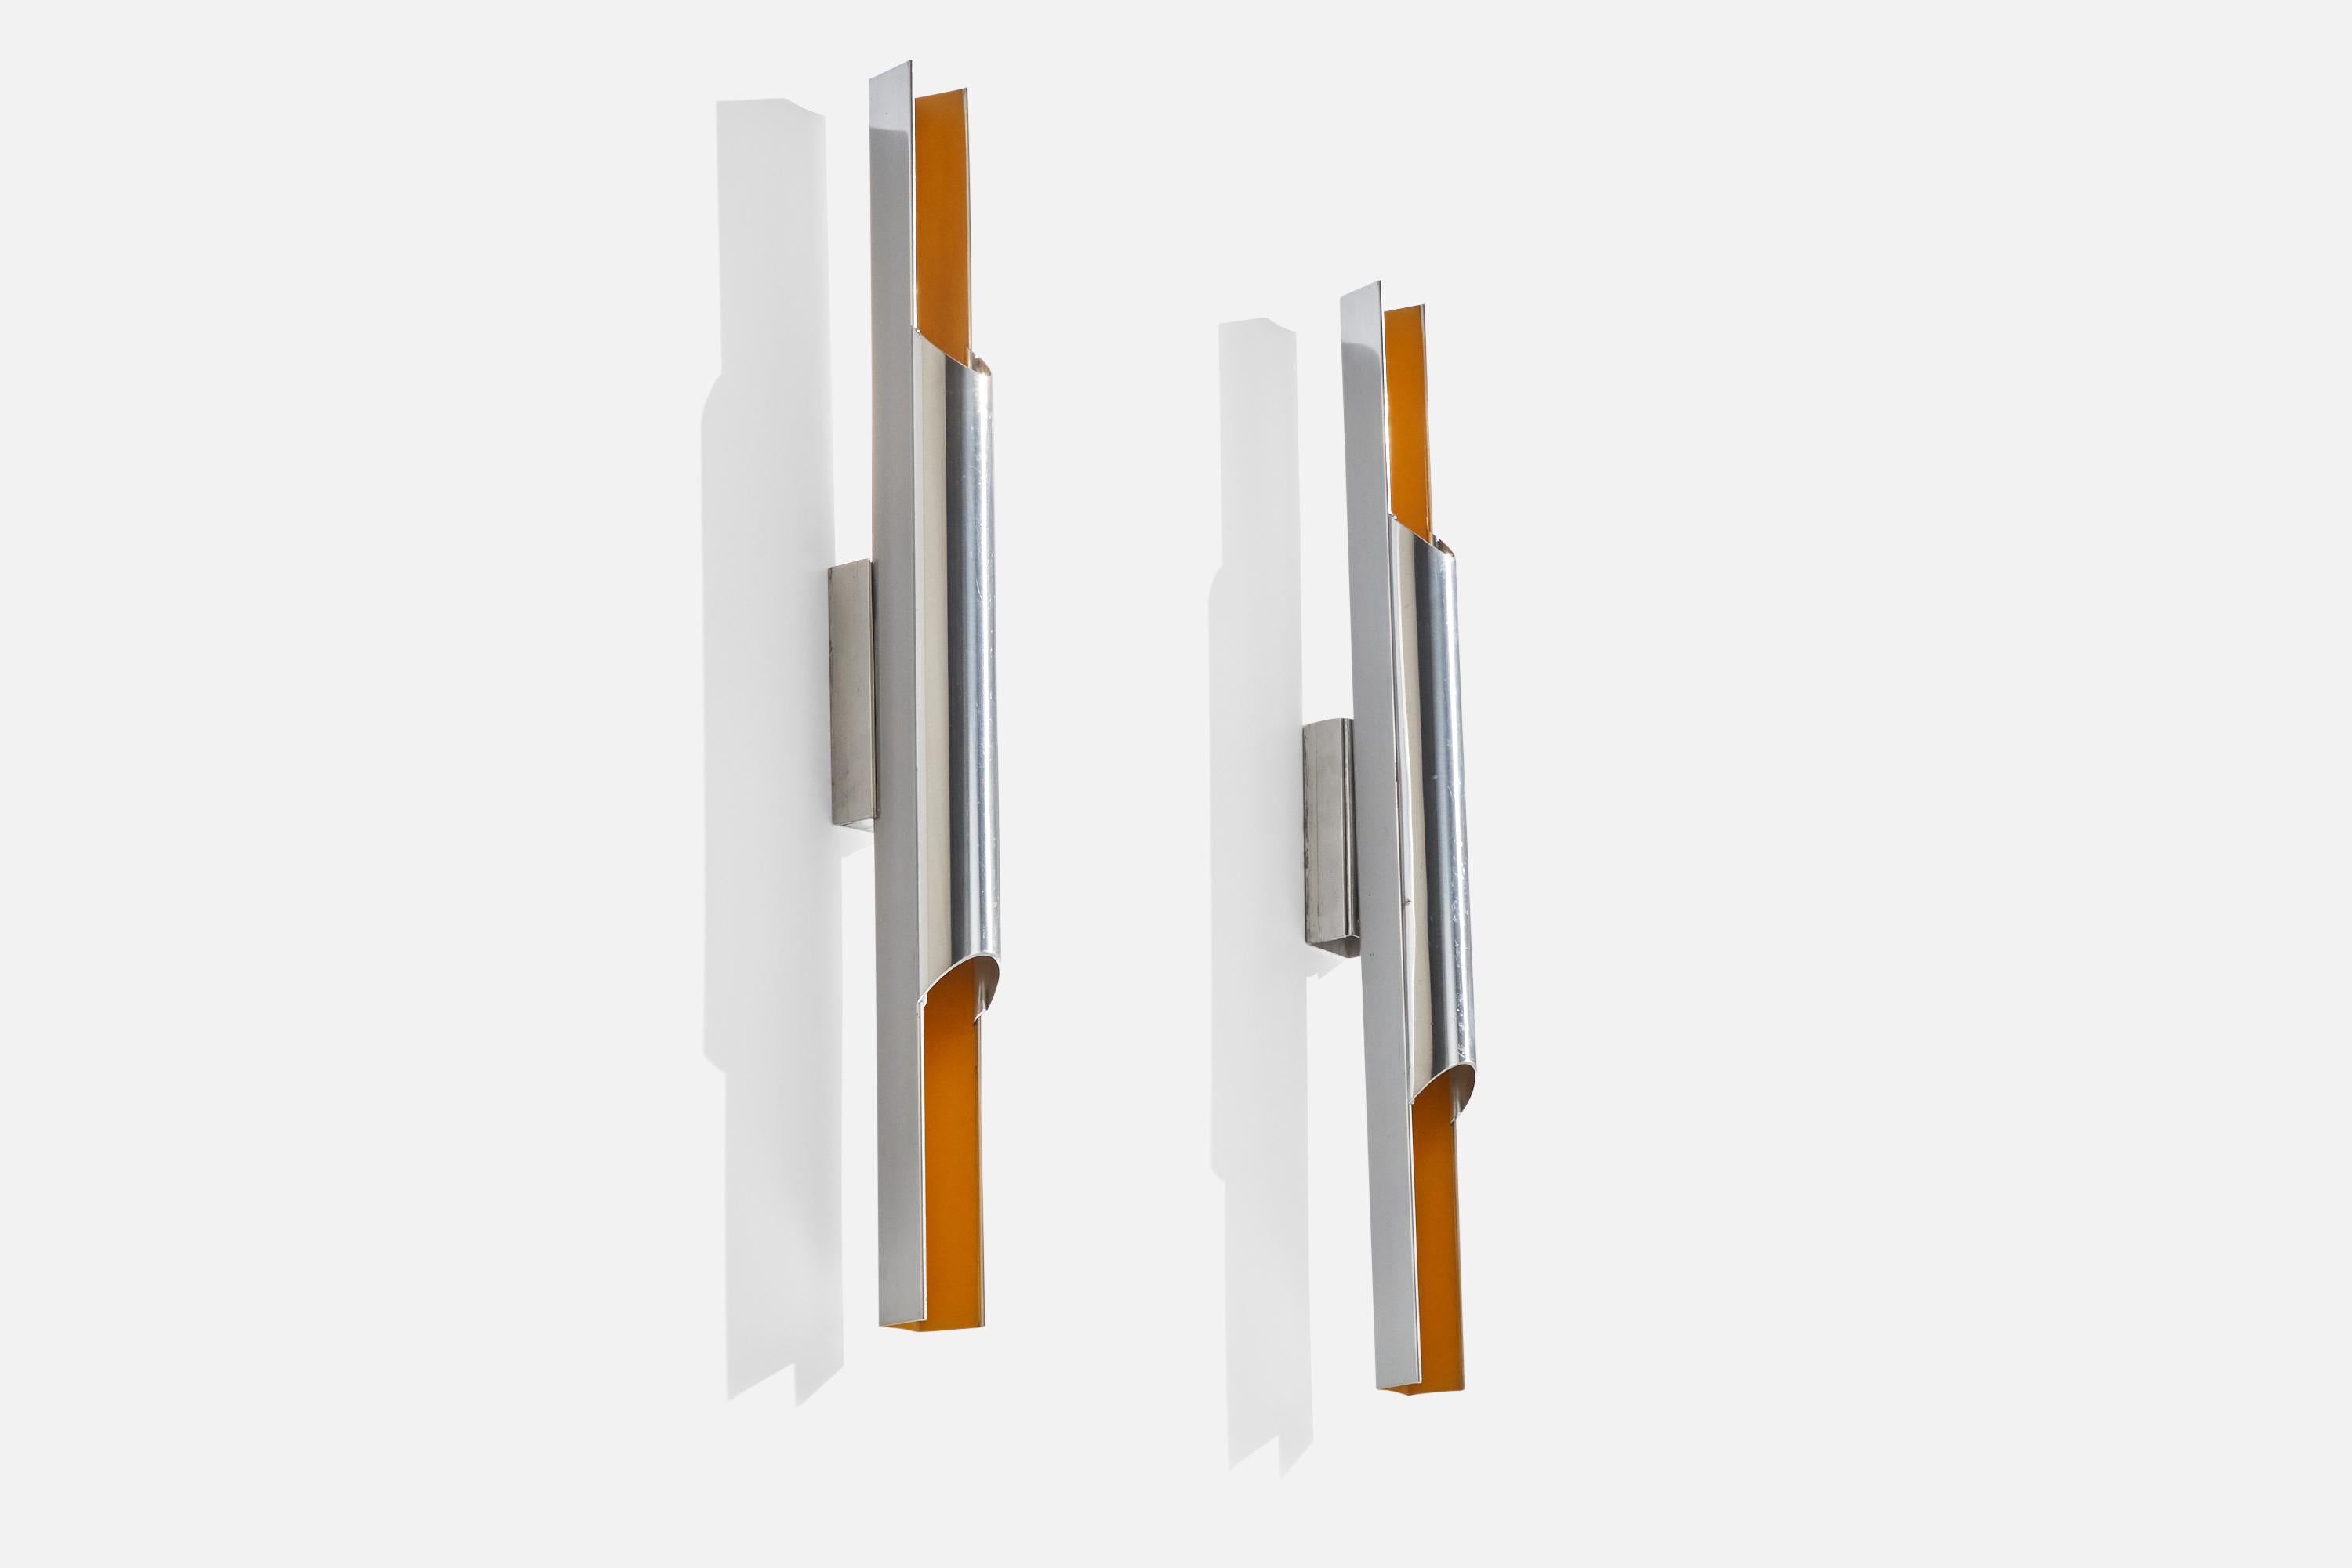 A pair of orange-lacquered aluminum wall lights designed by Bent Karlby and produced by Lyfa, Denmark, 1960s.

Overall Dimensions (inches): 23.75”  H x 1.8”  W x 3.5” D
Back Plate Dimensions (inches): 5” H x 1.5” W x 1”  D
Bulb Specifications: E-14